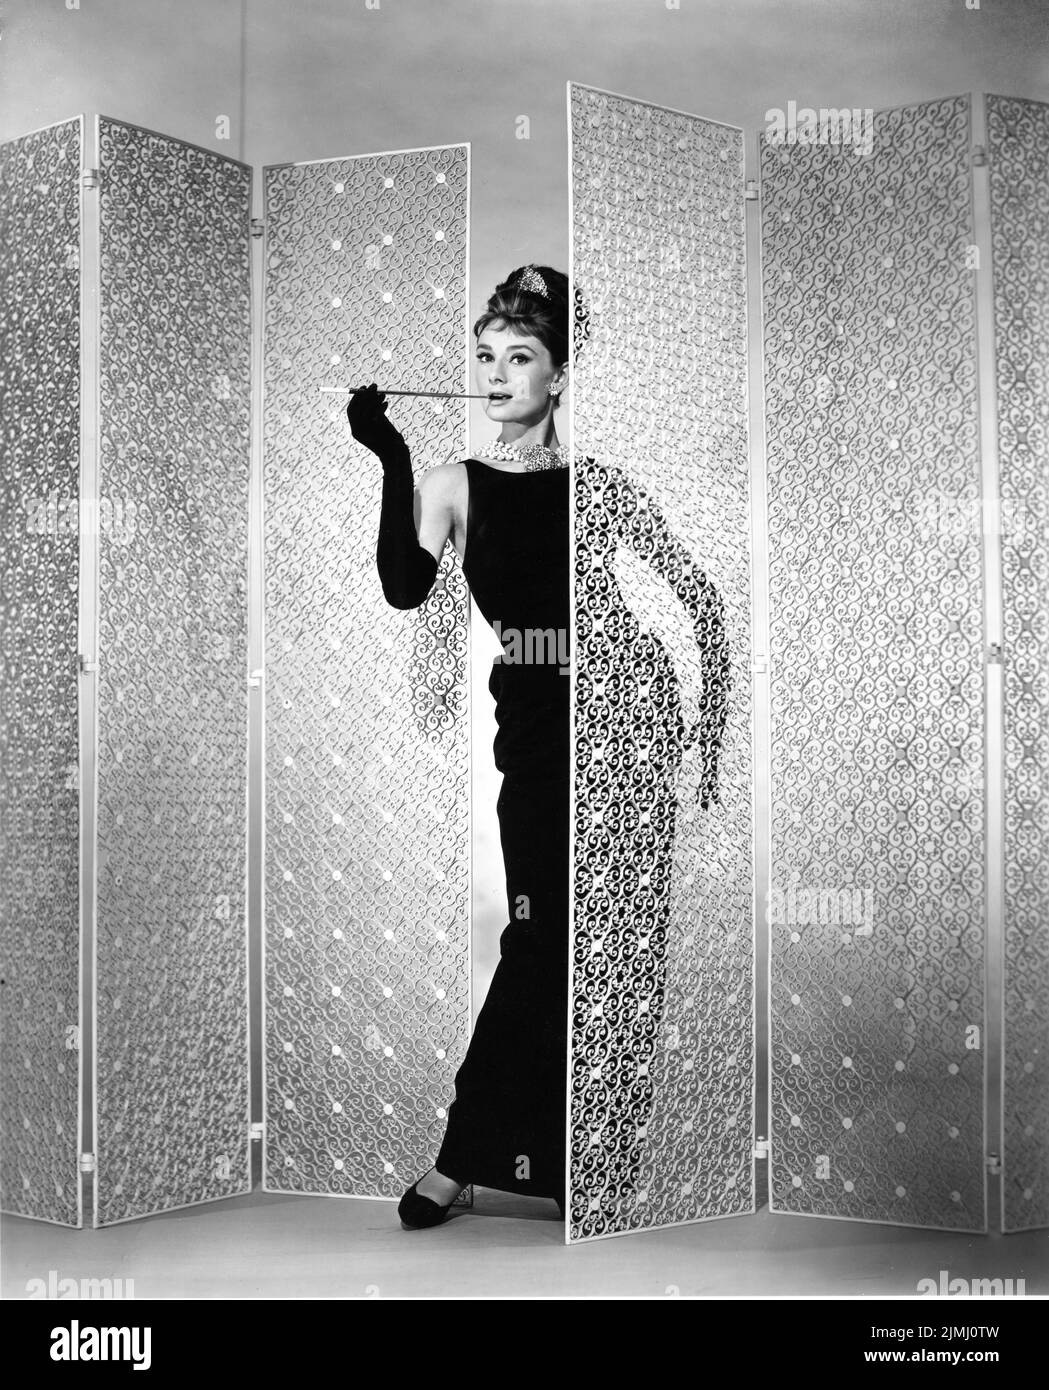 AUDREY HEPBURN as Holly Golightly Portrait by BUD FRAKER for BREAKFAST AT TIFFANY'S 1961 director BLAKE EDWARDS novel Truman Capote gown Hubert de Givenchy Jurow-Shepherd / Paramount Pictures Stock Photo